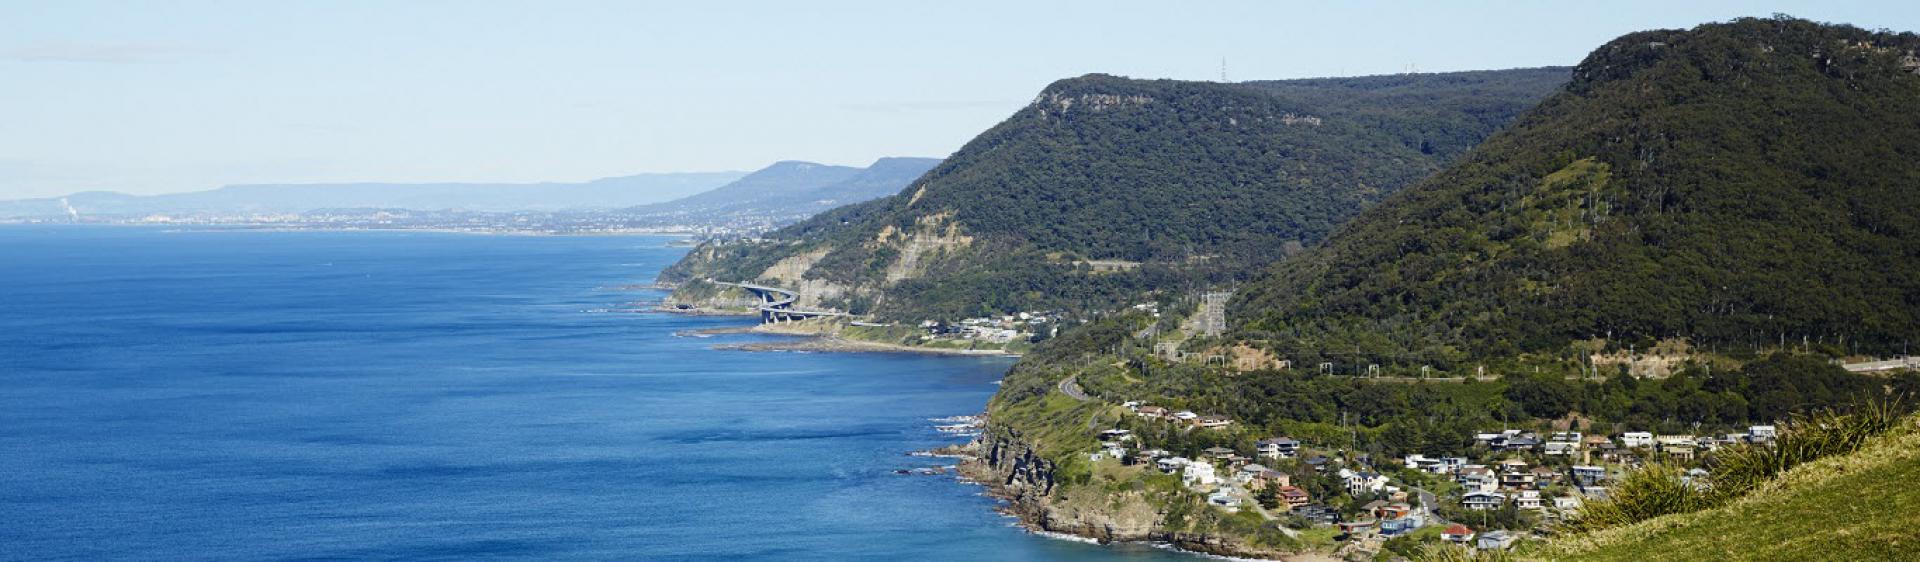 Stanwell Tops, Wollongong